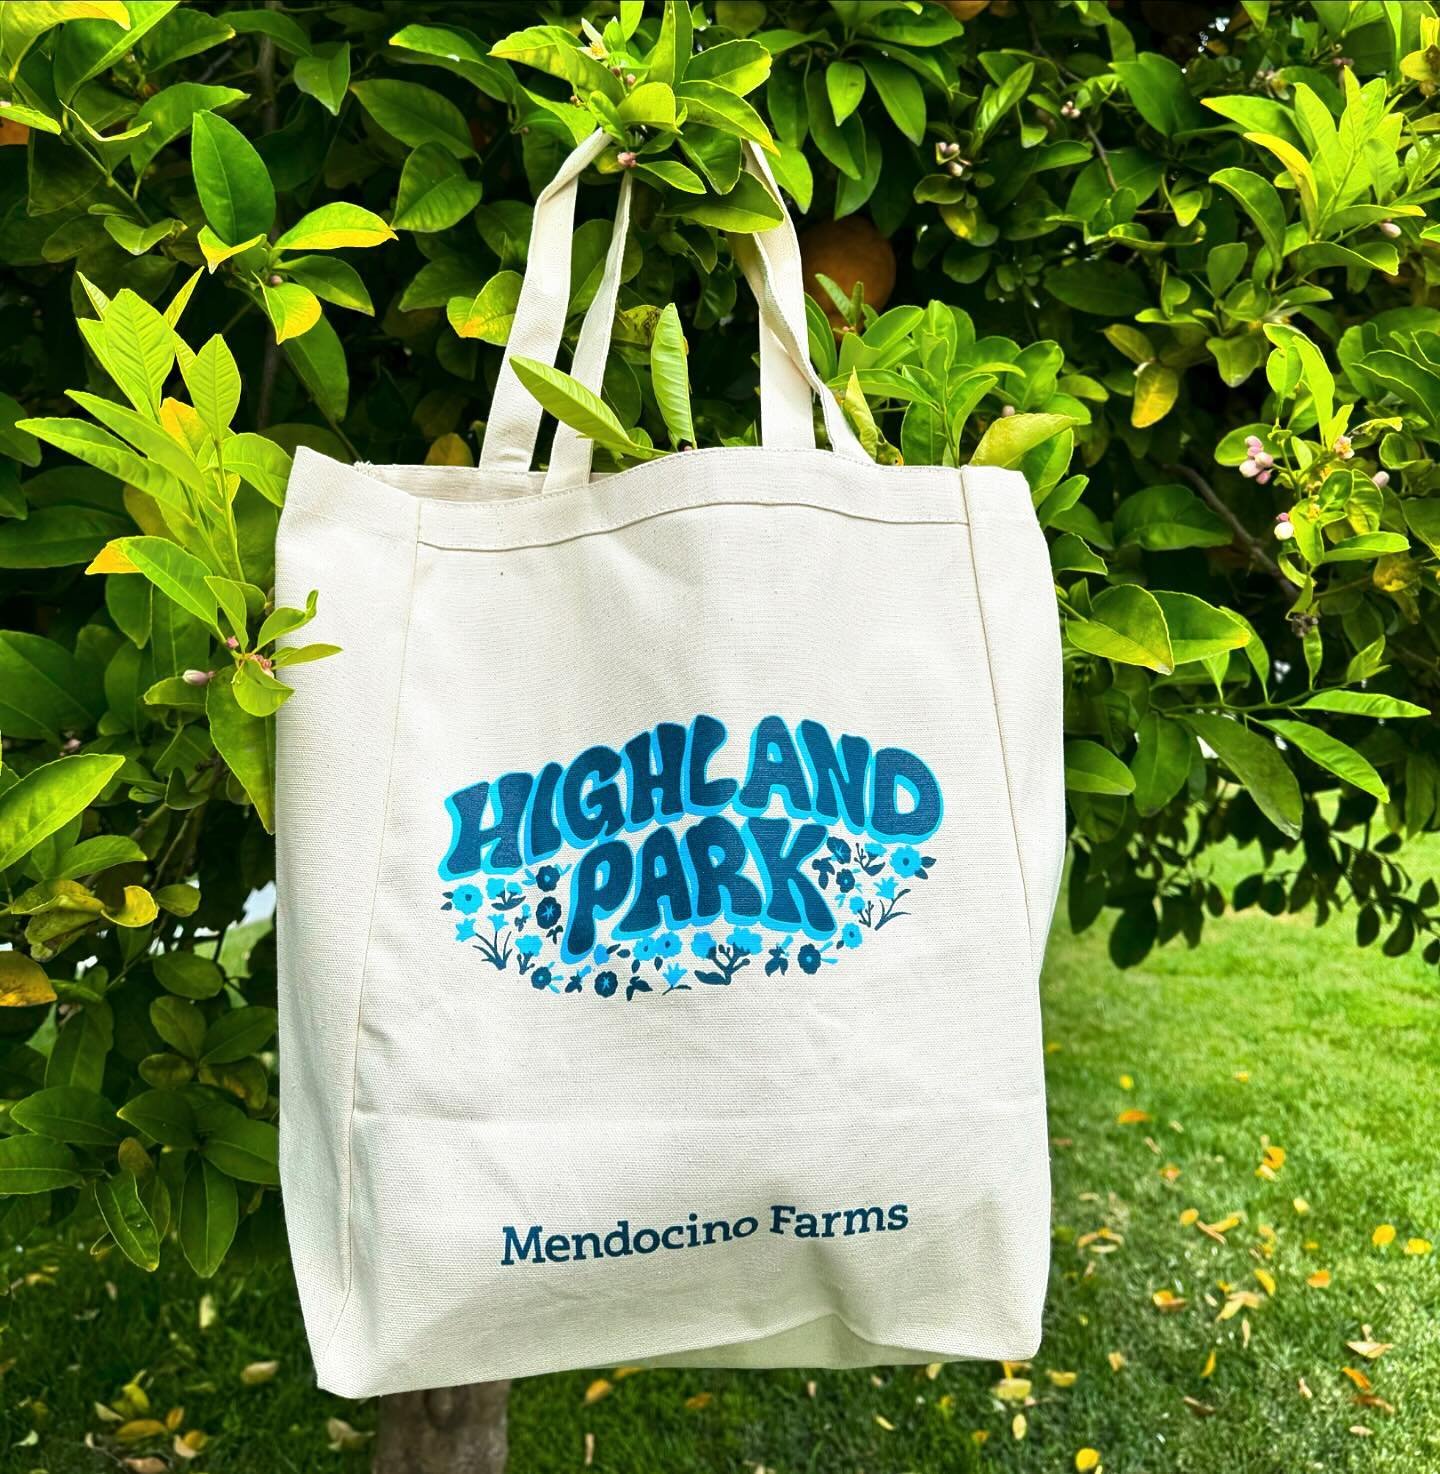 i have some totes to giveaway! This was one of the designs I worked on for @mendocinofarms in Highland Park that was repurposed for a free tote that was gifted to customers opening day. I received a few and want to send them out to whomever will appr